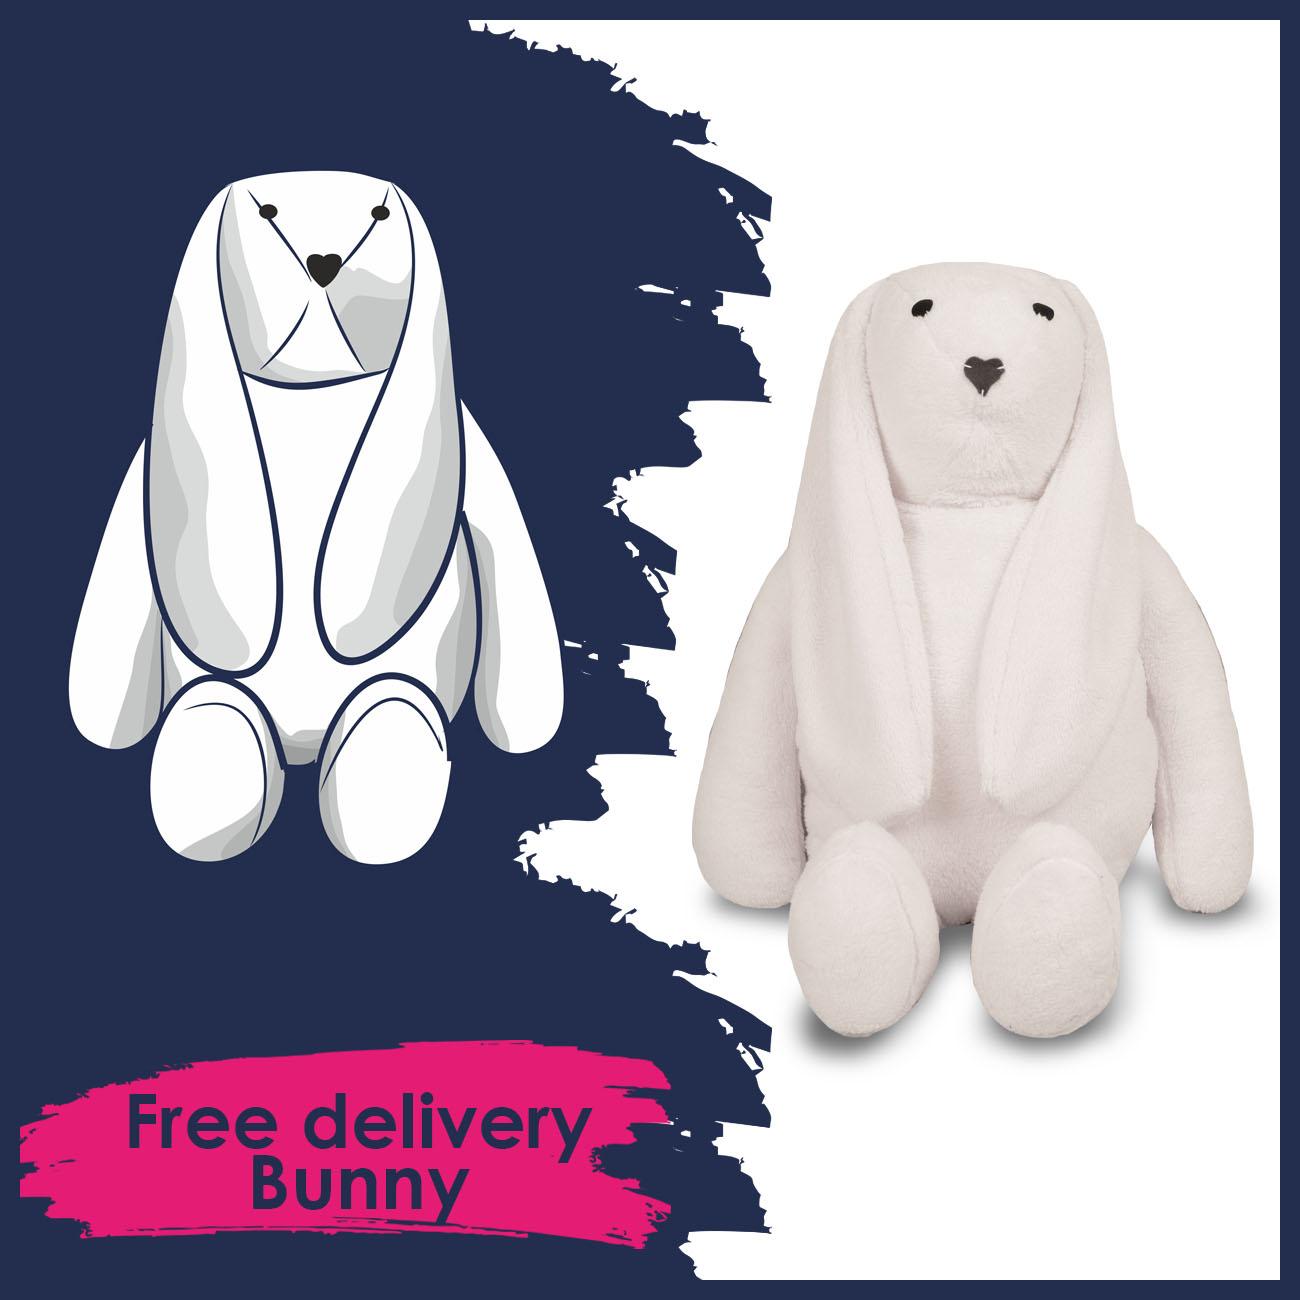 BUNNY FREE DELIVERY